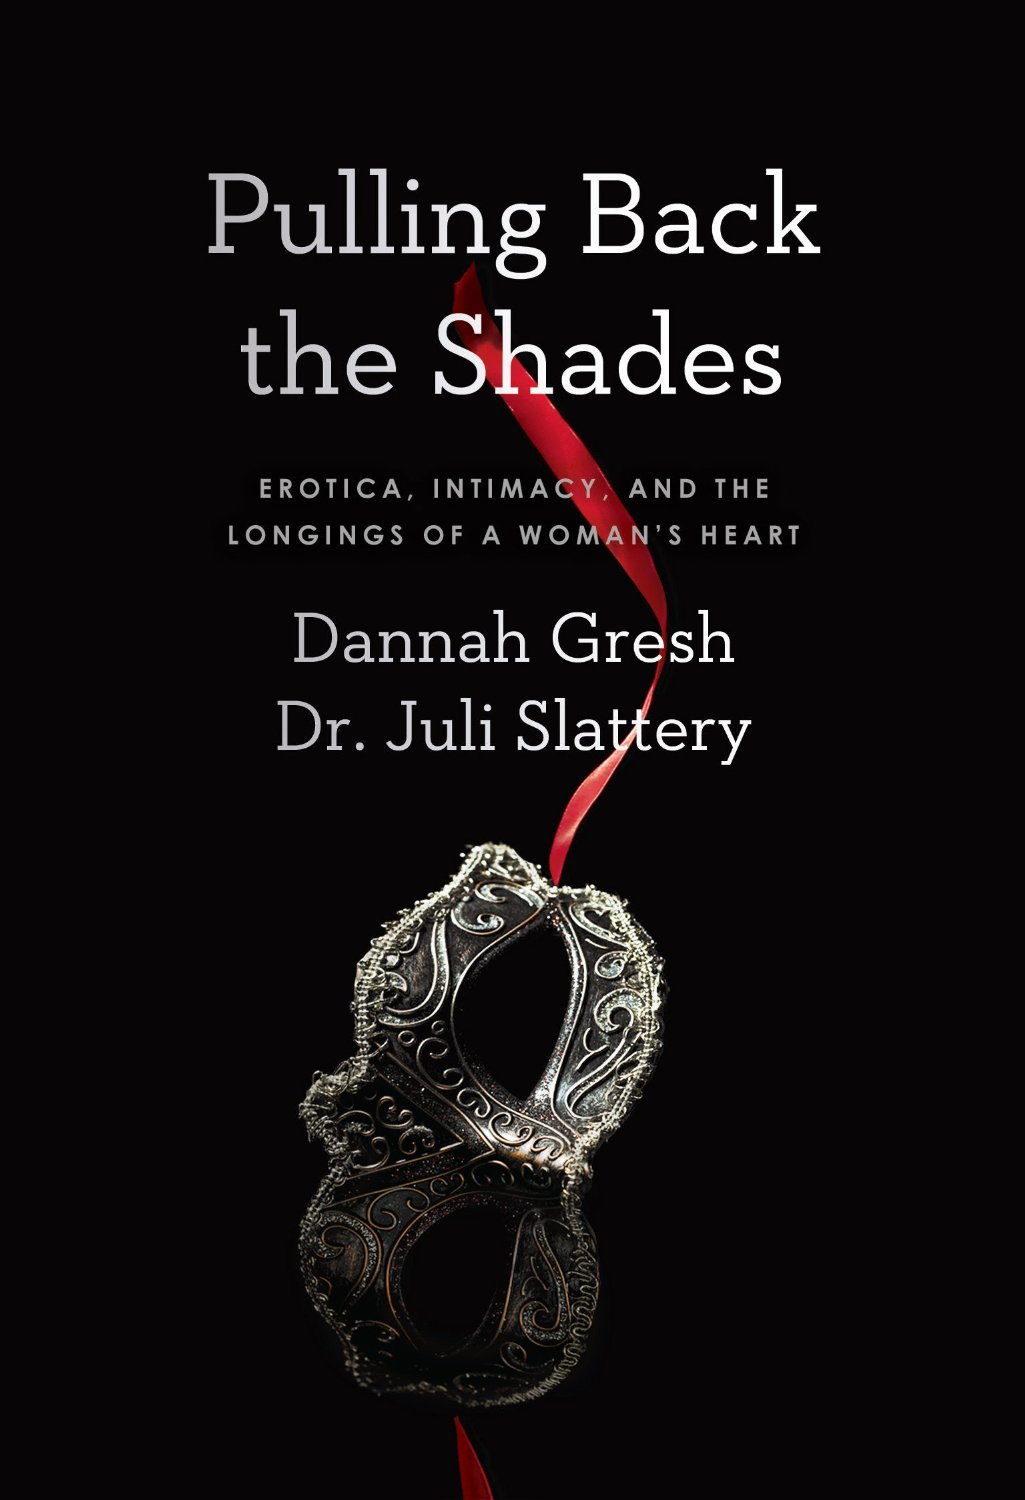 Book Review Revisited: Pulling Back the Shades